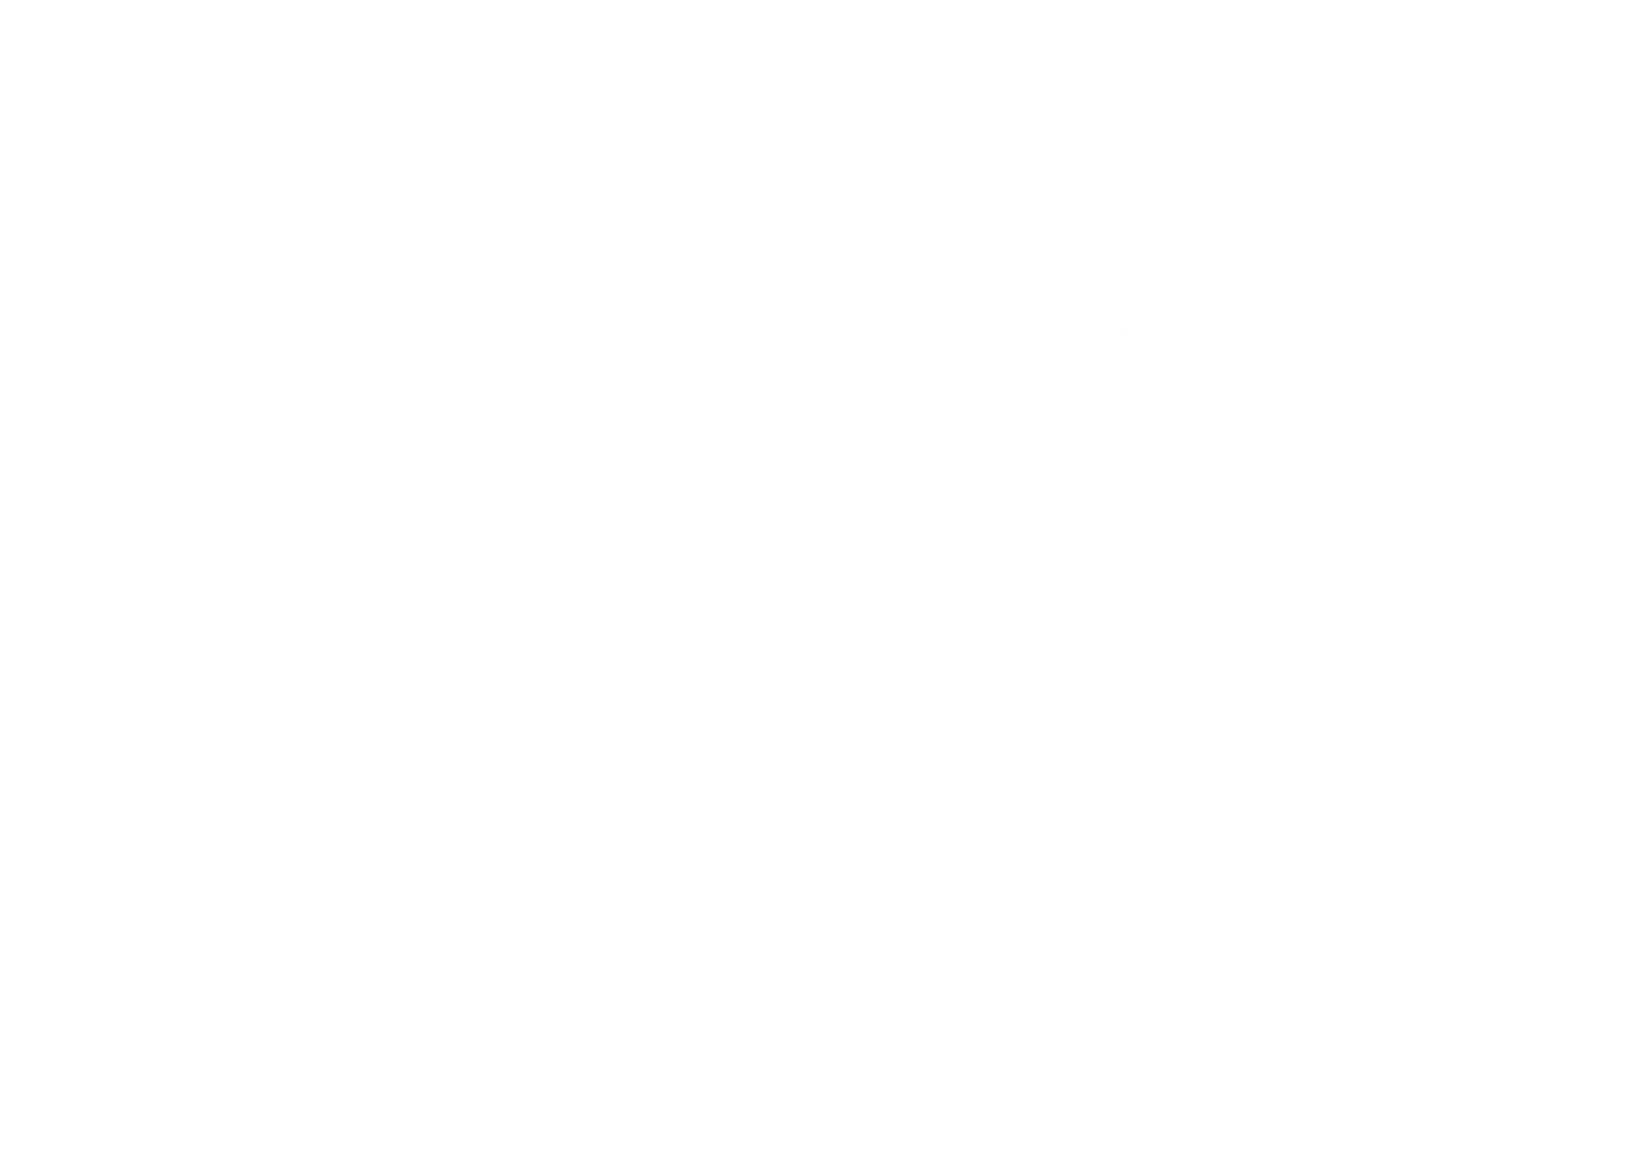 unsecured business lines logo